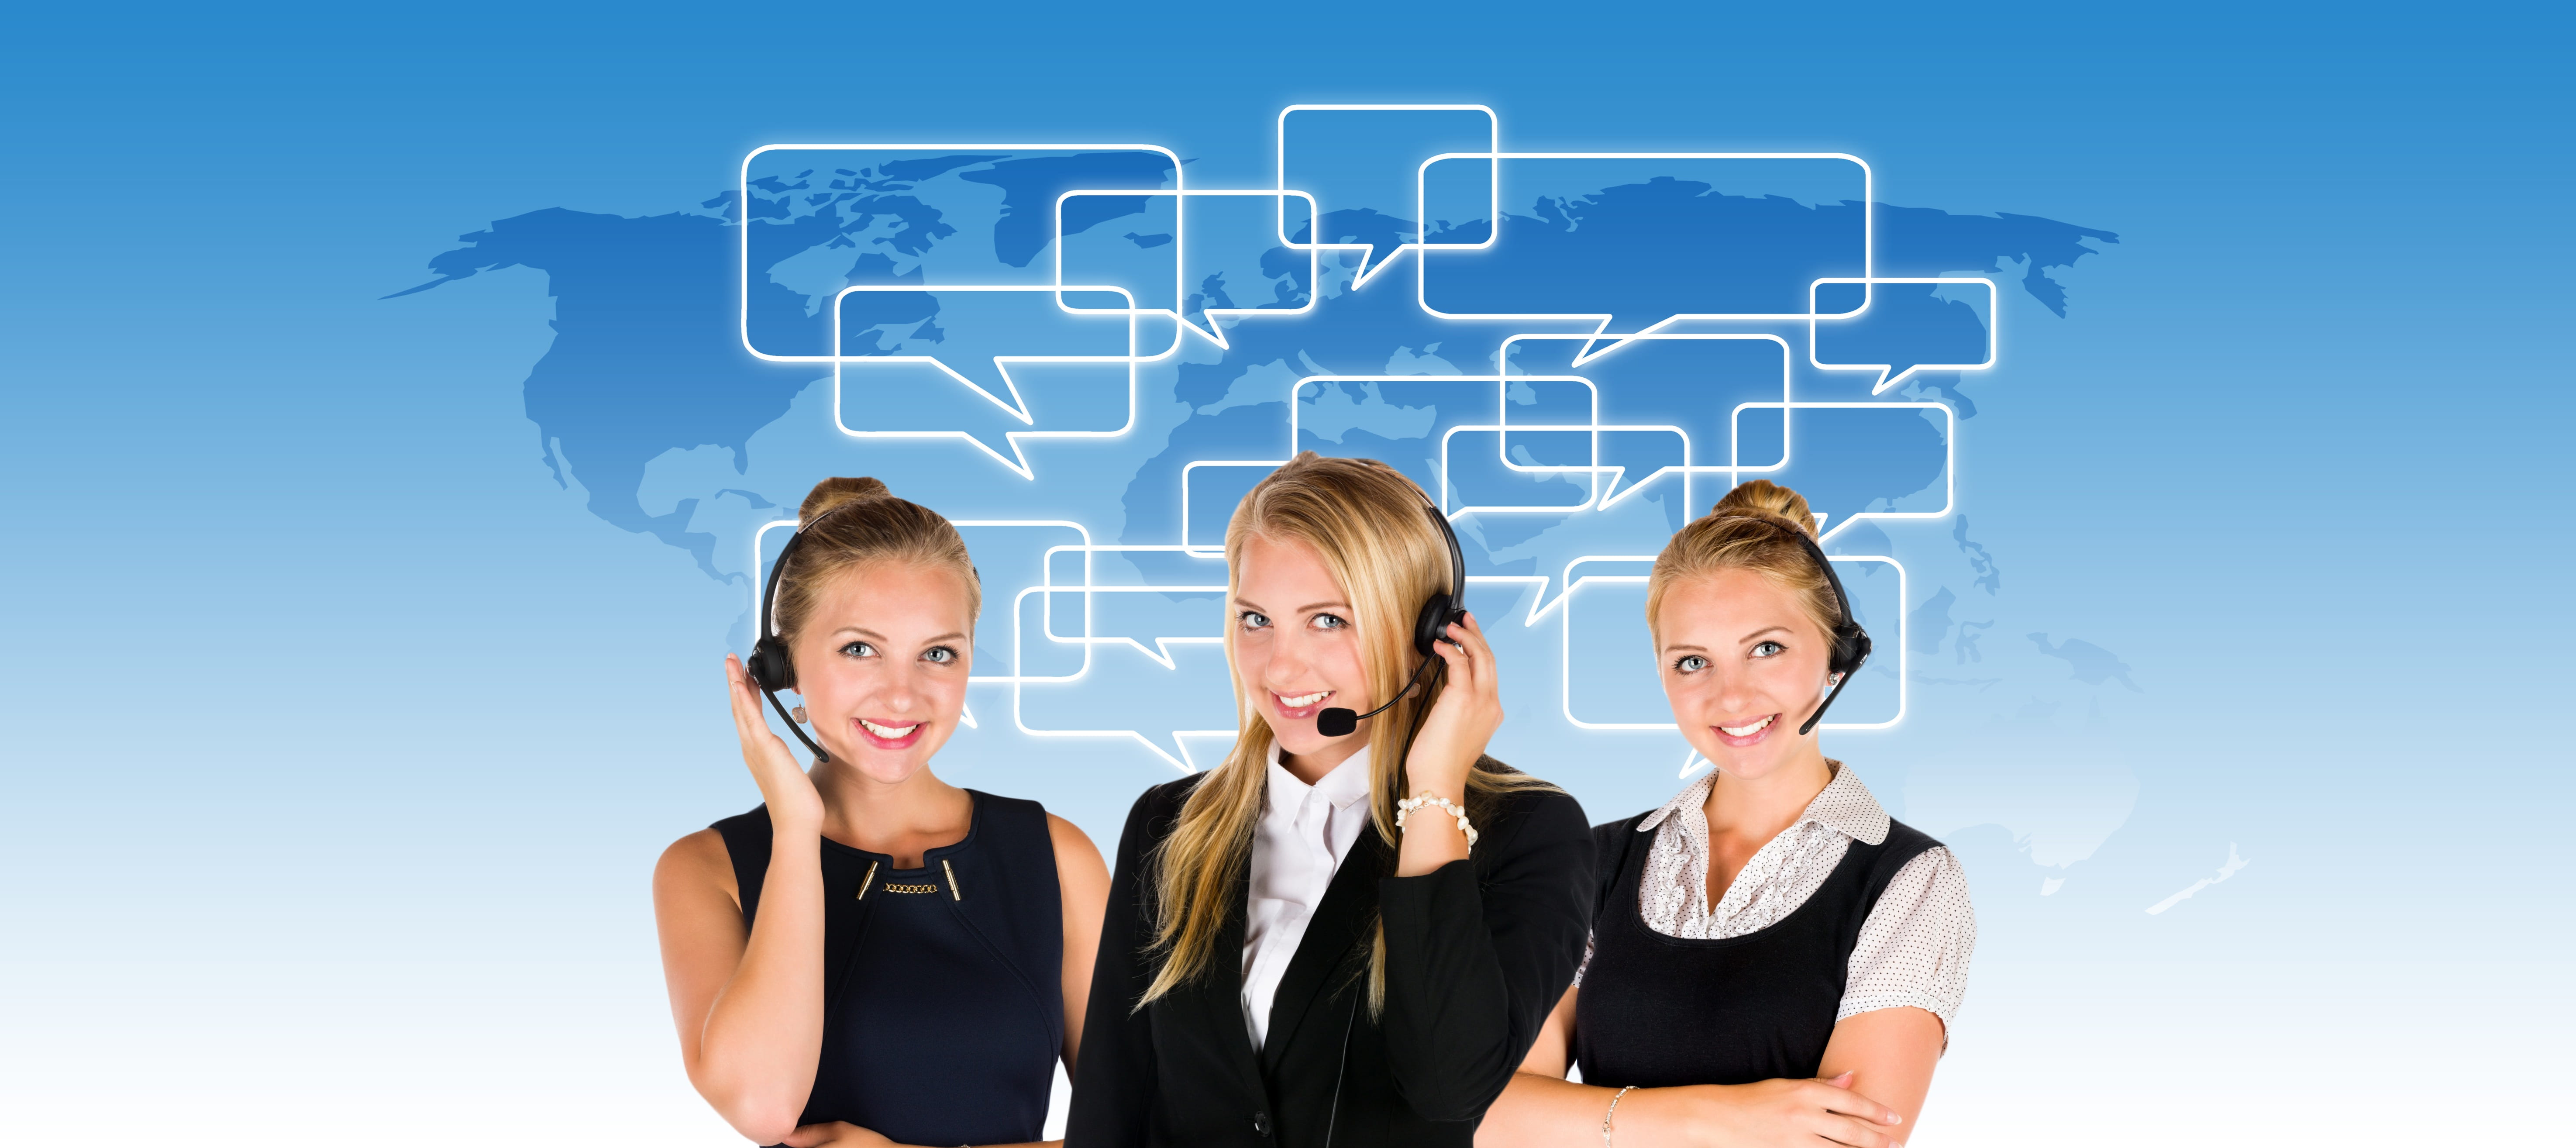 call center, headset, woman, service, consulting, information